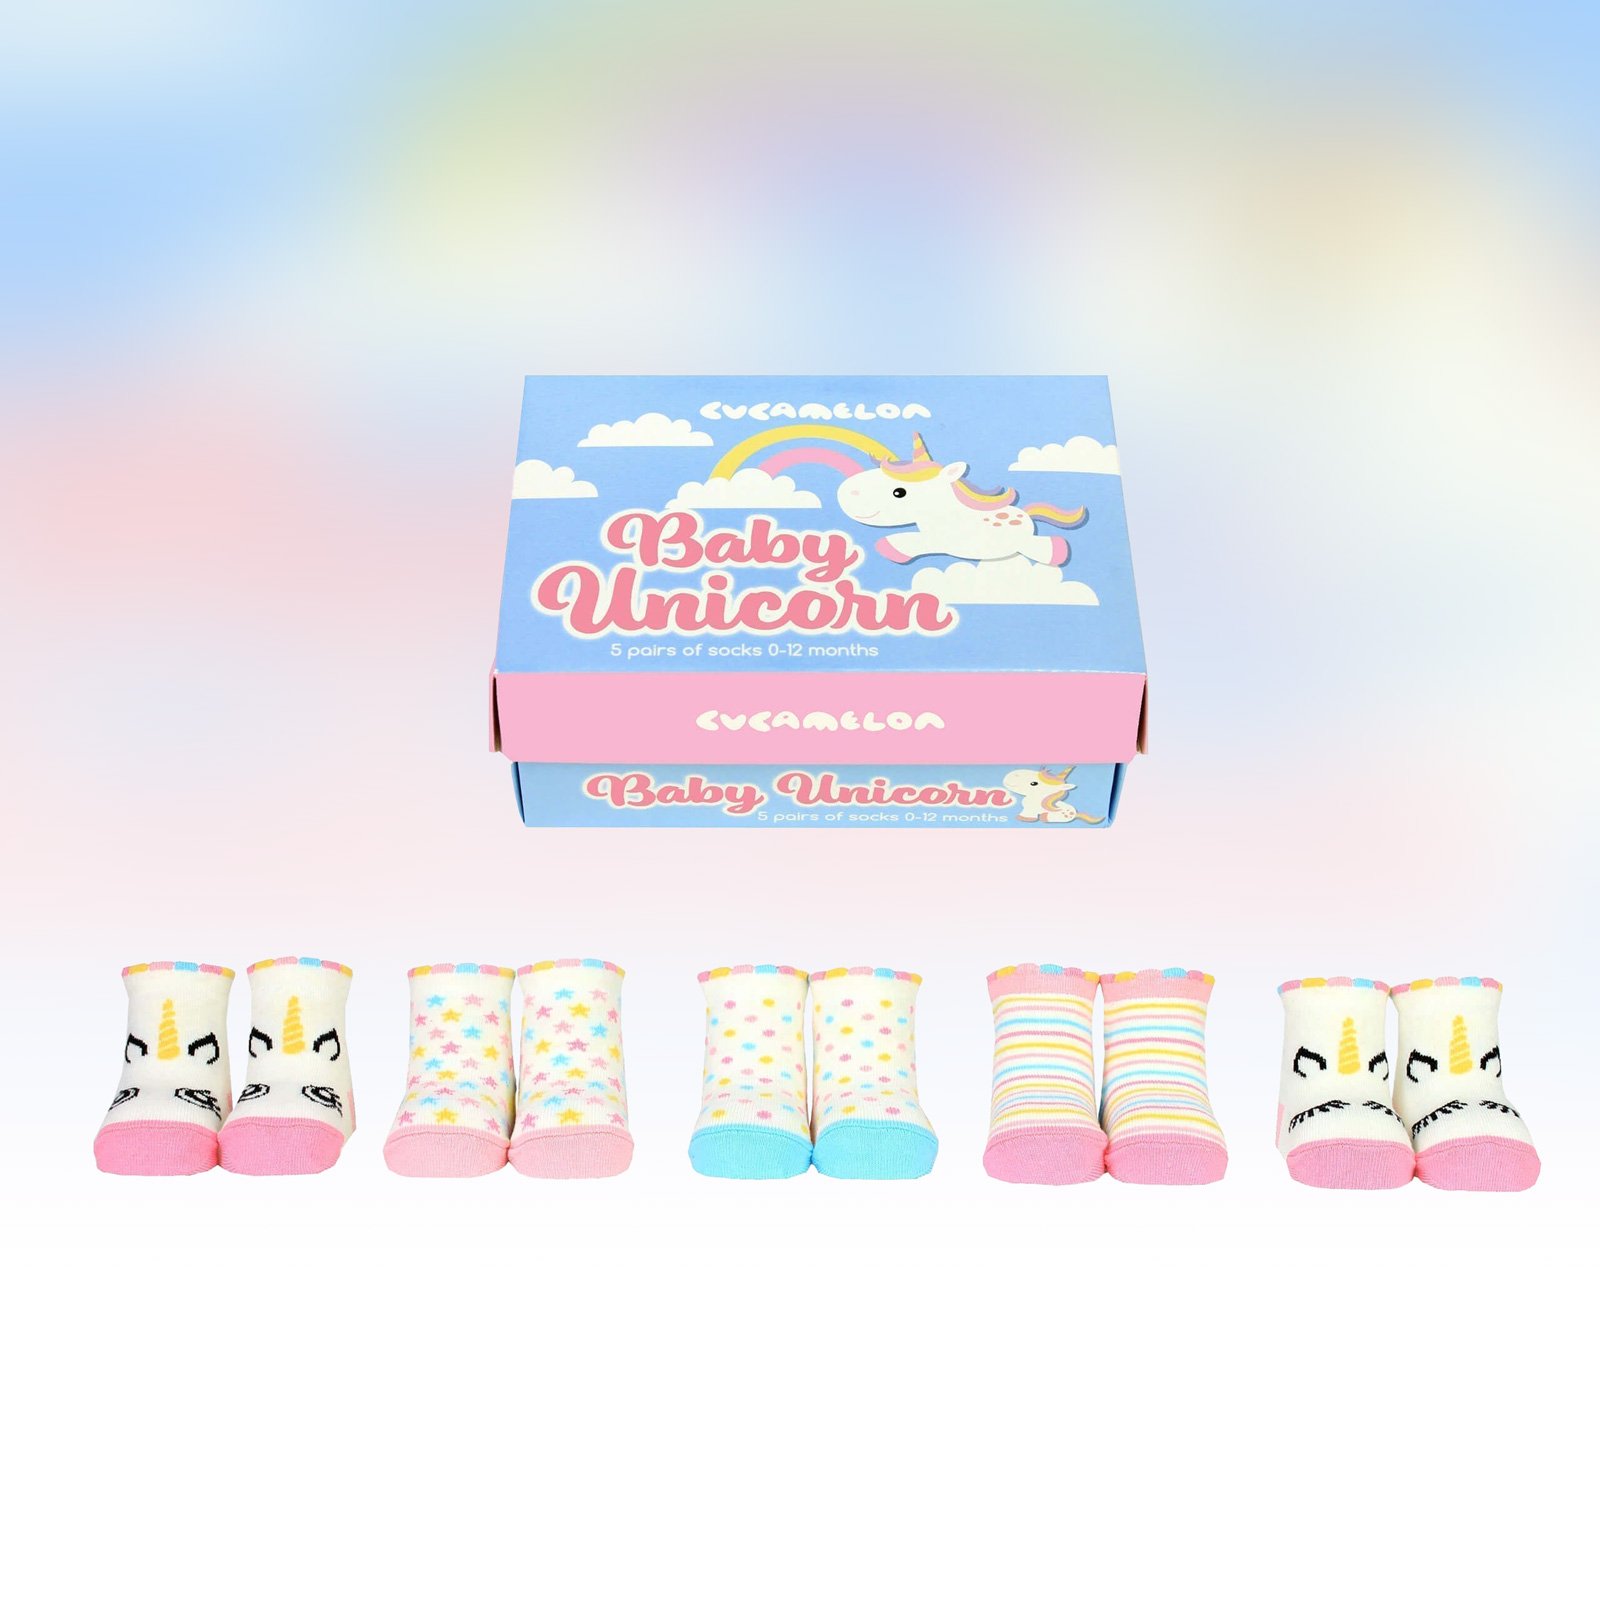 Baby Unicorn Socks 0 12 Months By Cucamelon 5 Pack